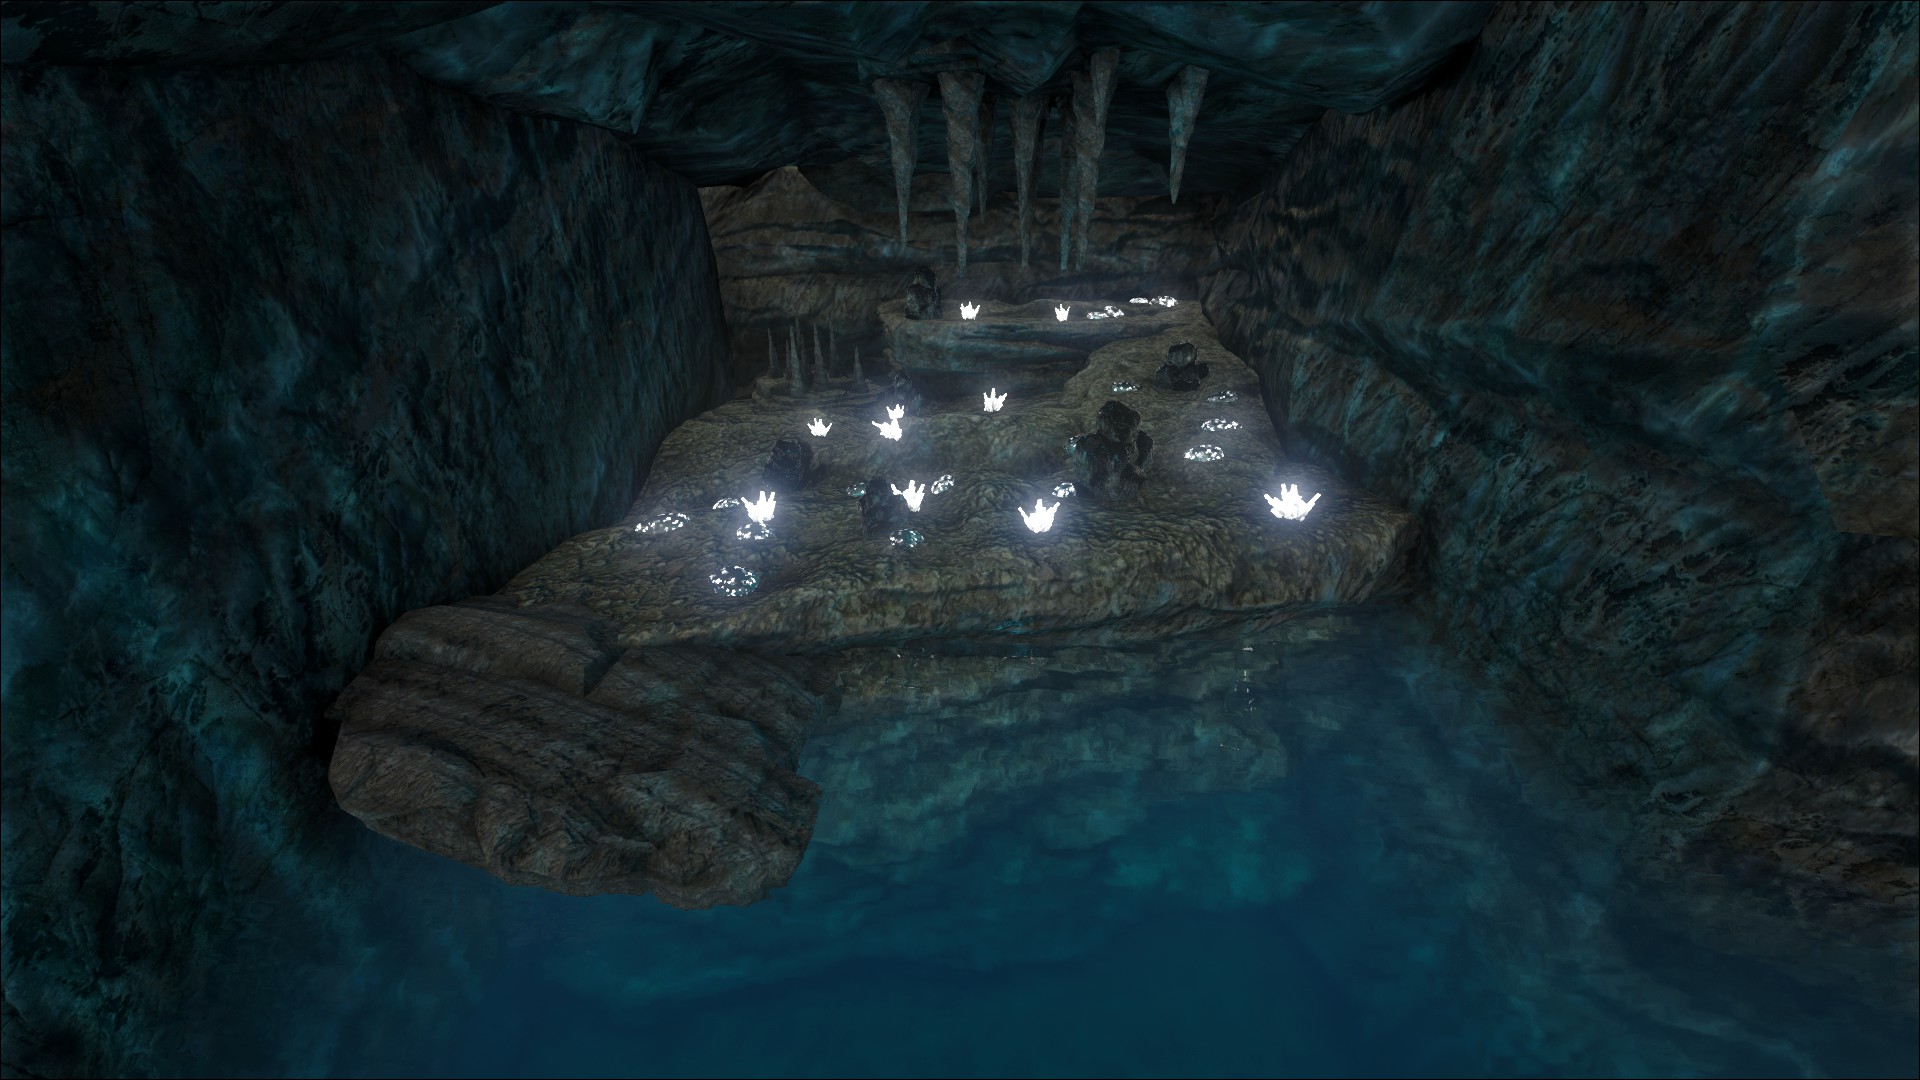 Gallery of Ark Island Pearl Cave Locations.